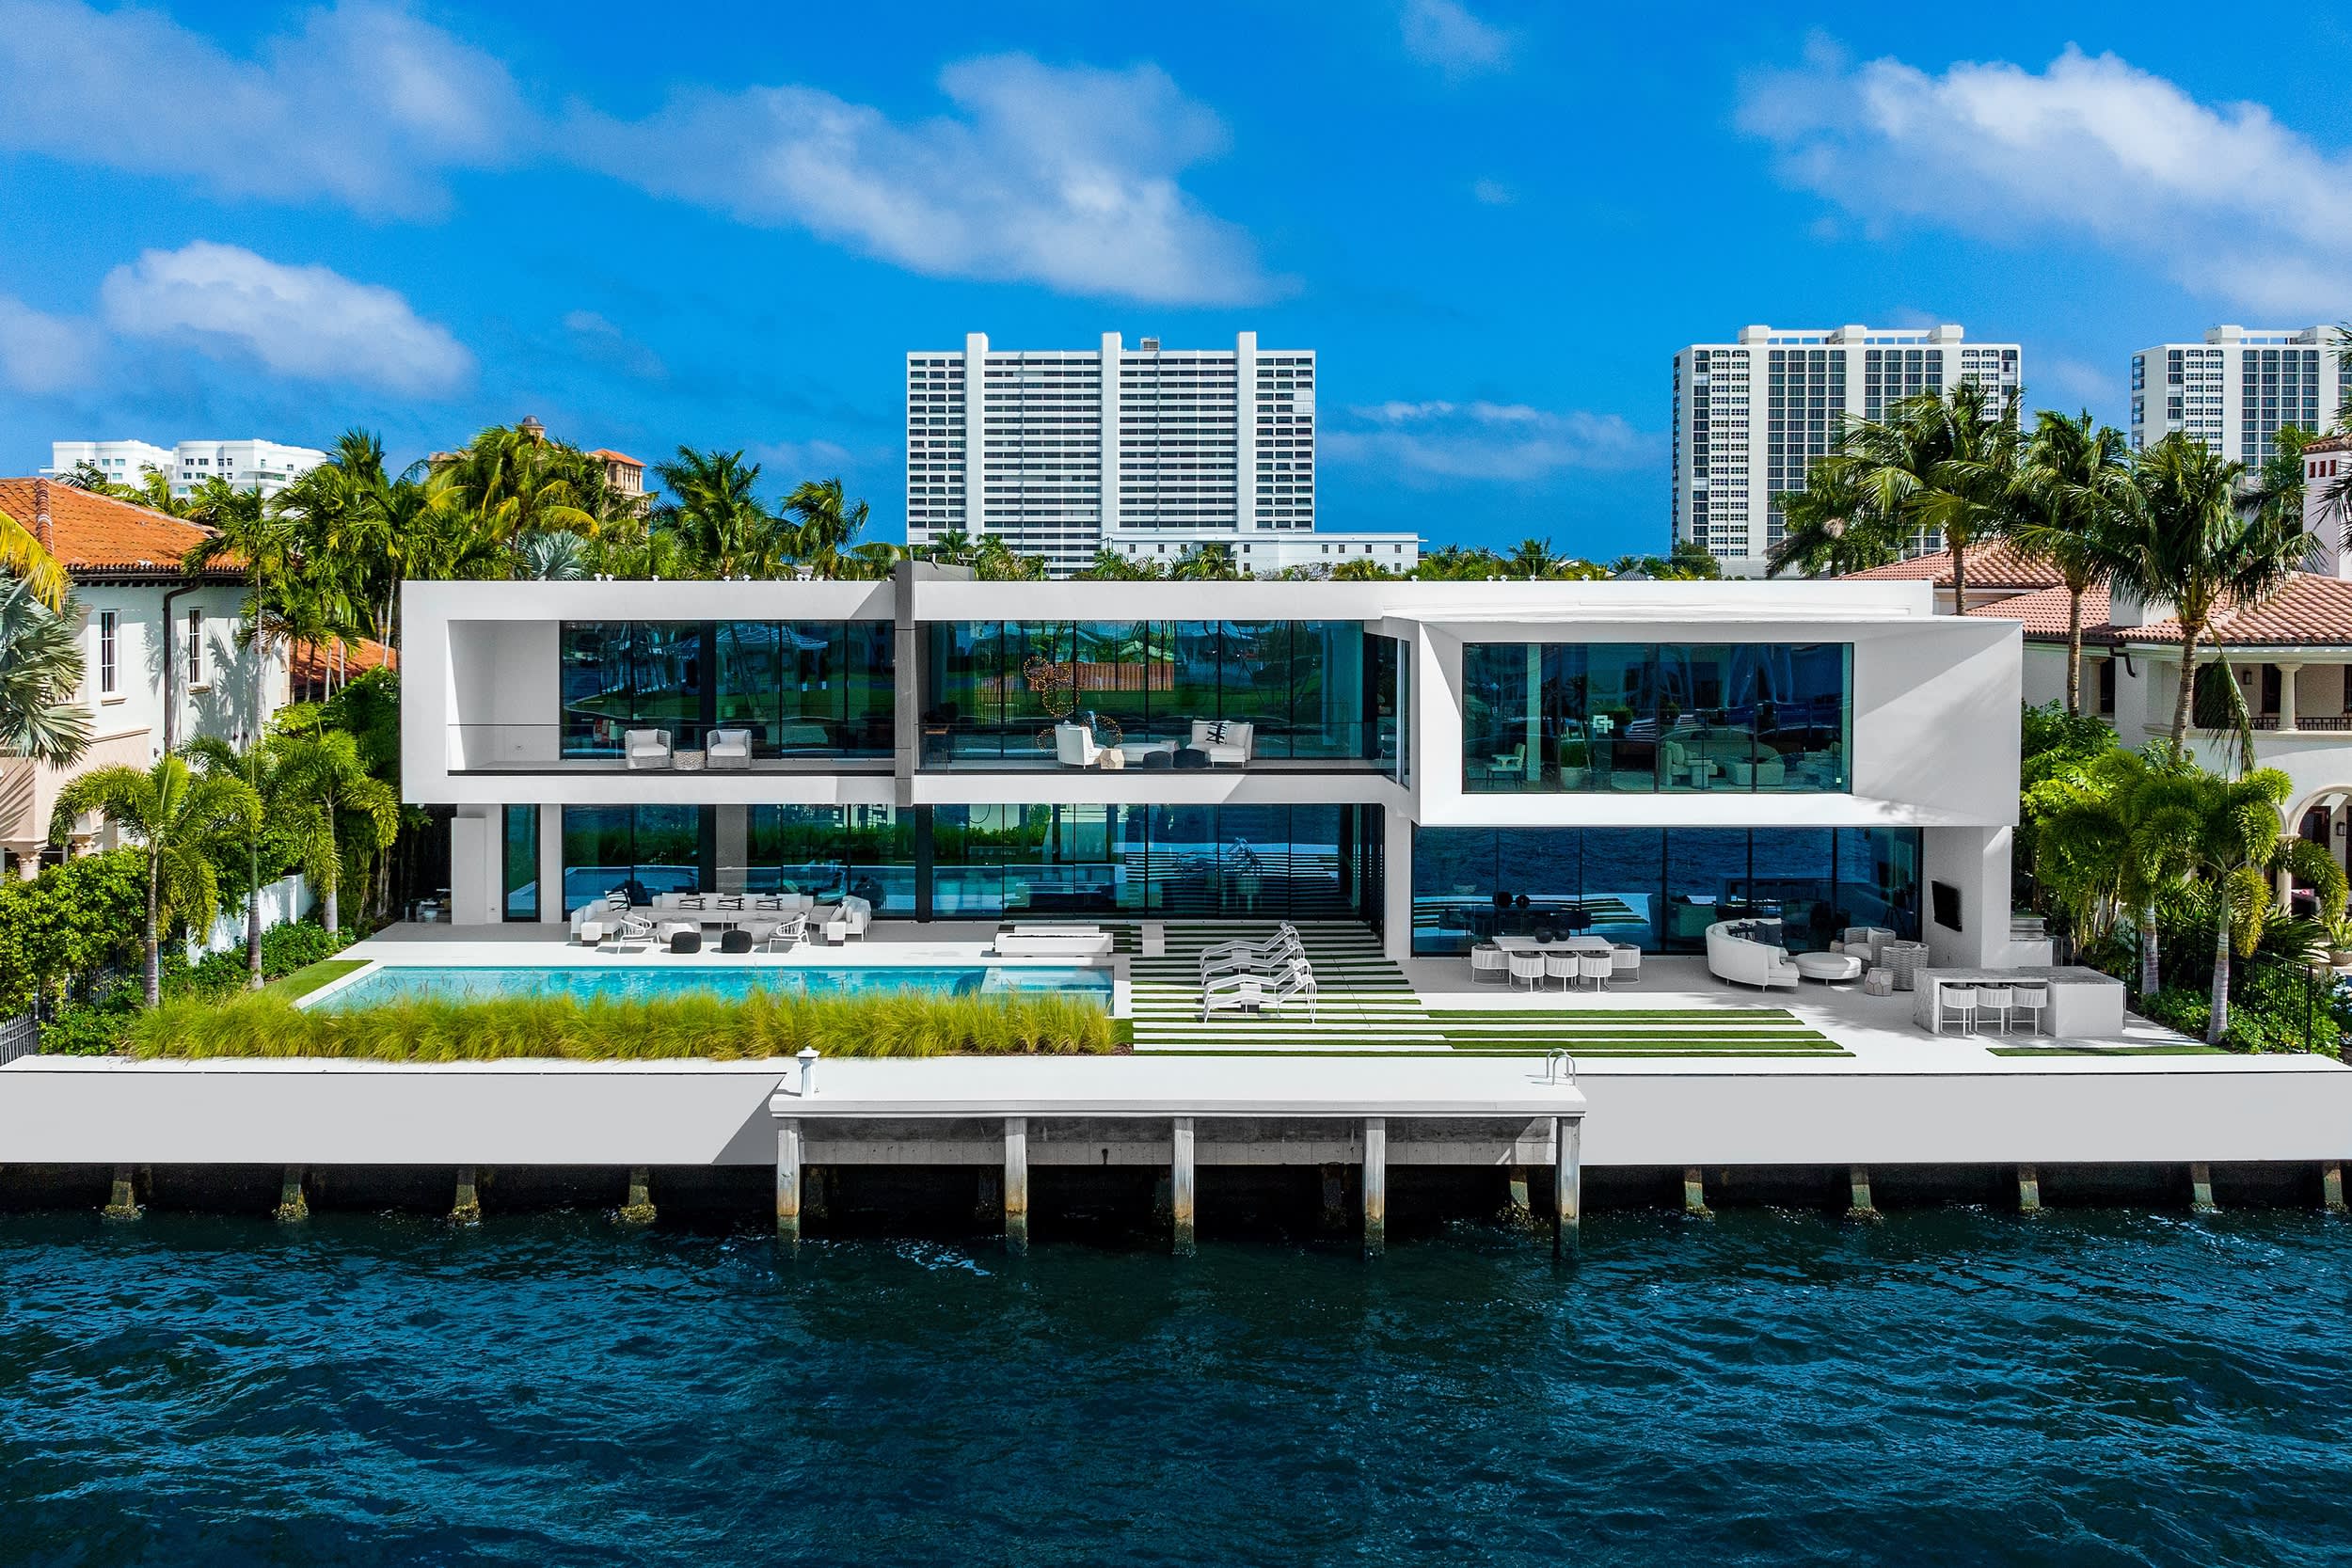 Mansions in Boca Raton are commanding Miami Beach prices. Here’s a look inside